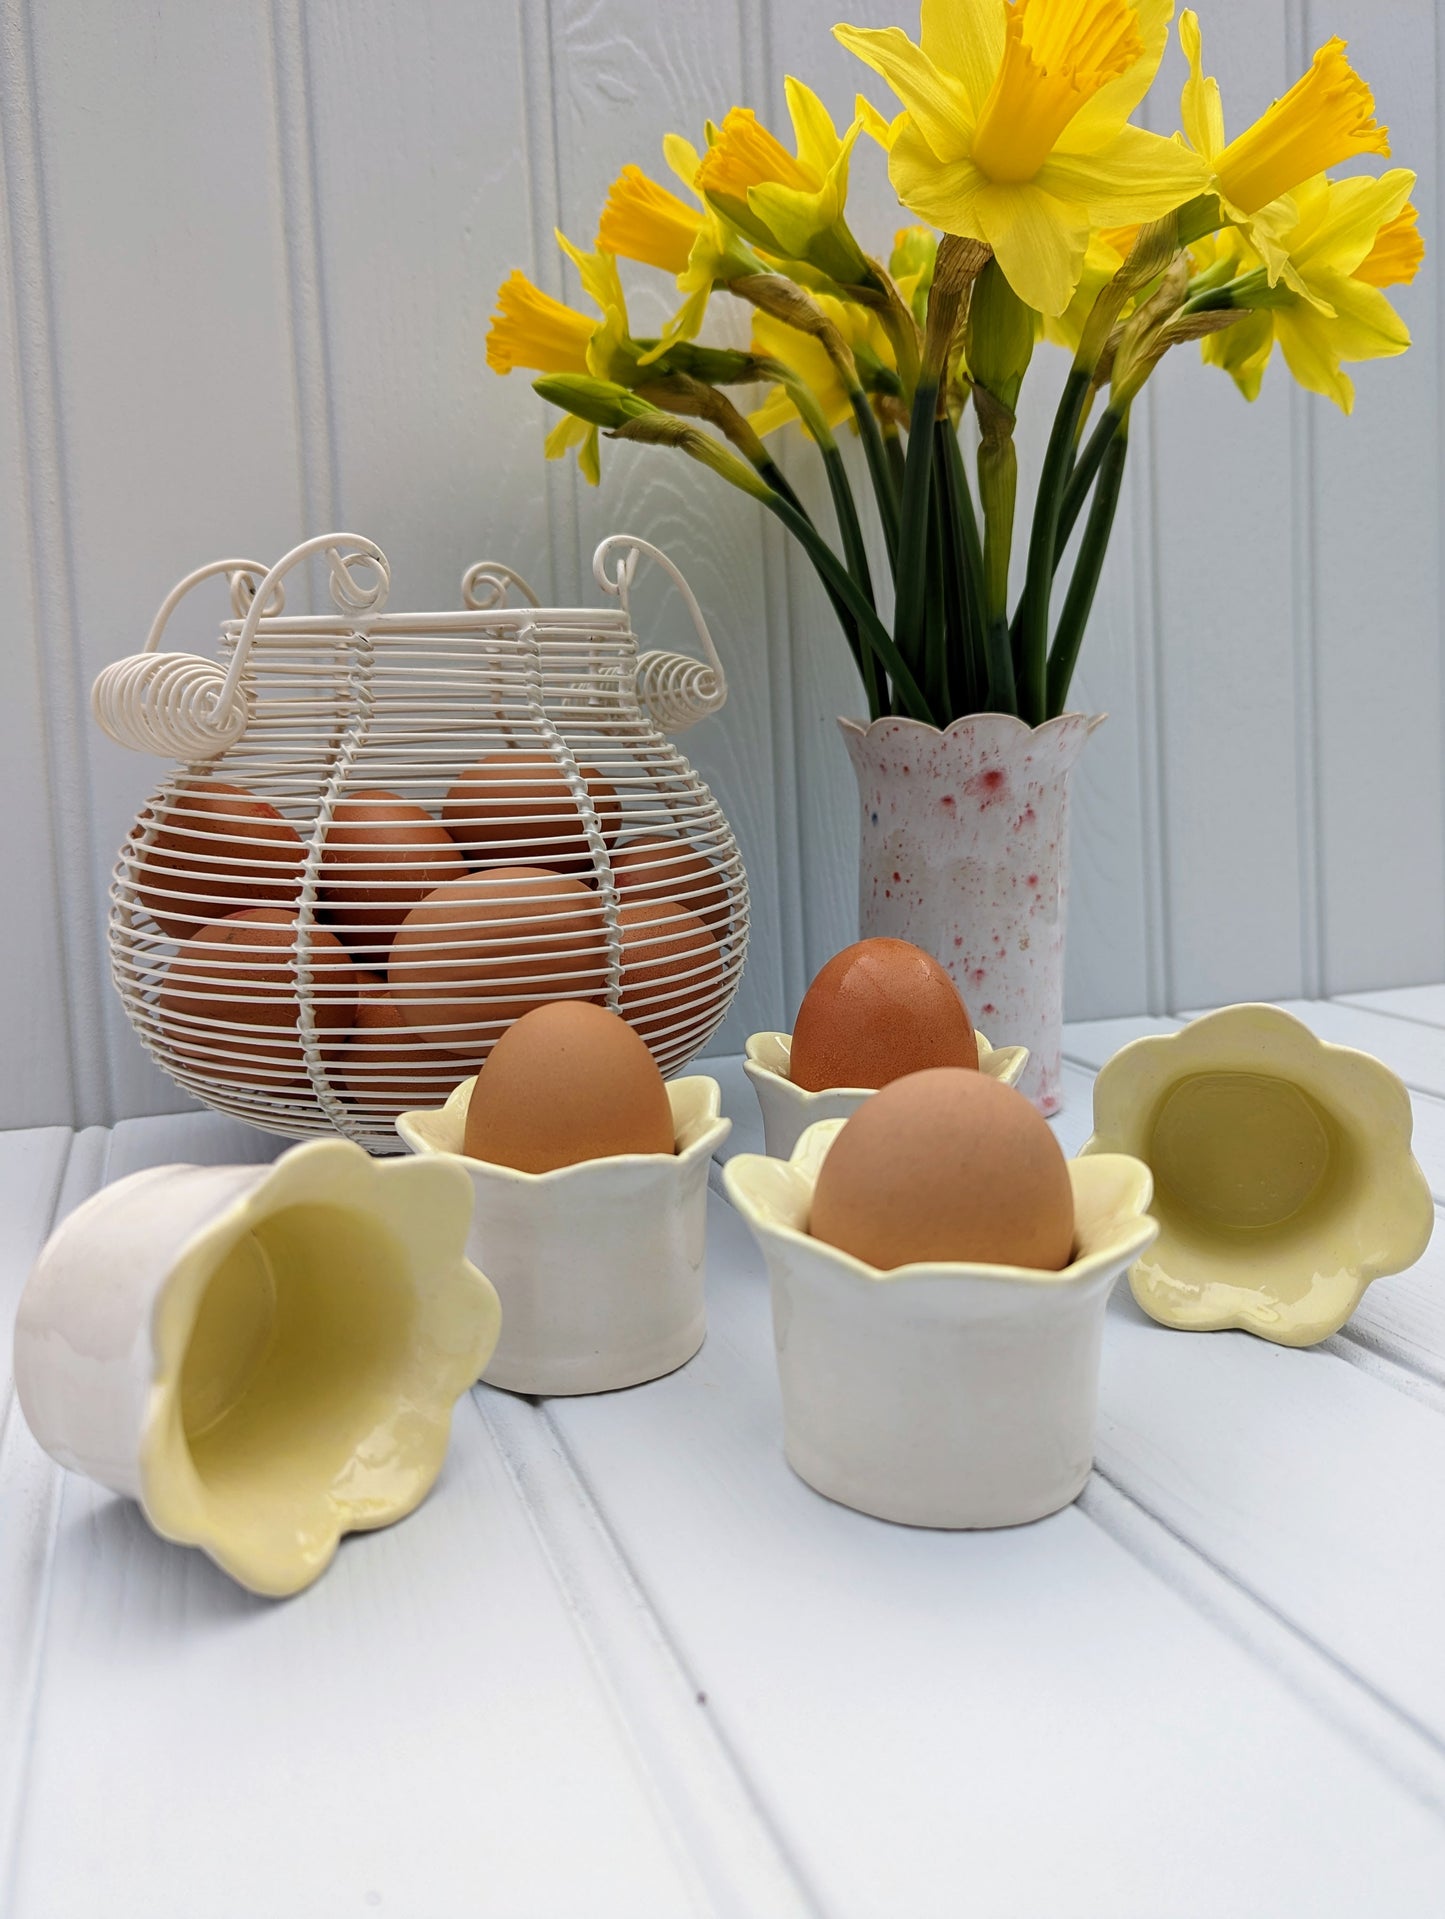 Sea Bramble Ceramics - Handmade Earthenware Daisy egg cups with a scalloped top and glazed with  a white exterior and  yellow interior. Shown here with eggs, egg basket and a beautiful bunch of daffodils in a red speckled Sea Bramble Daisy vase.